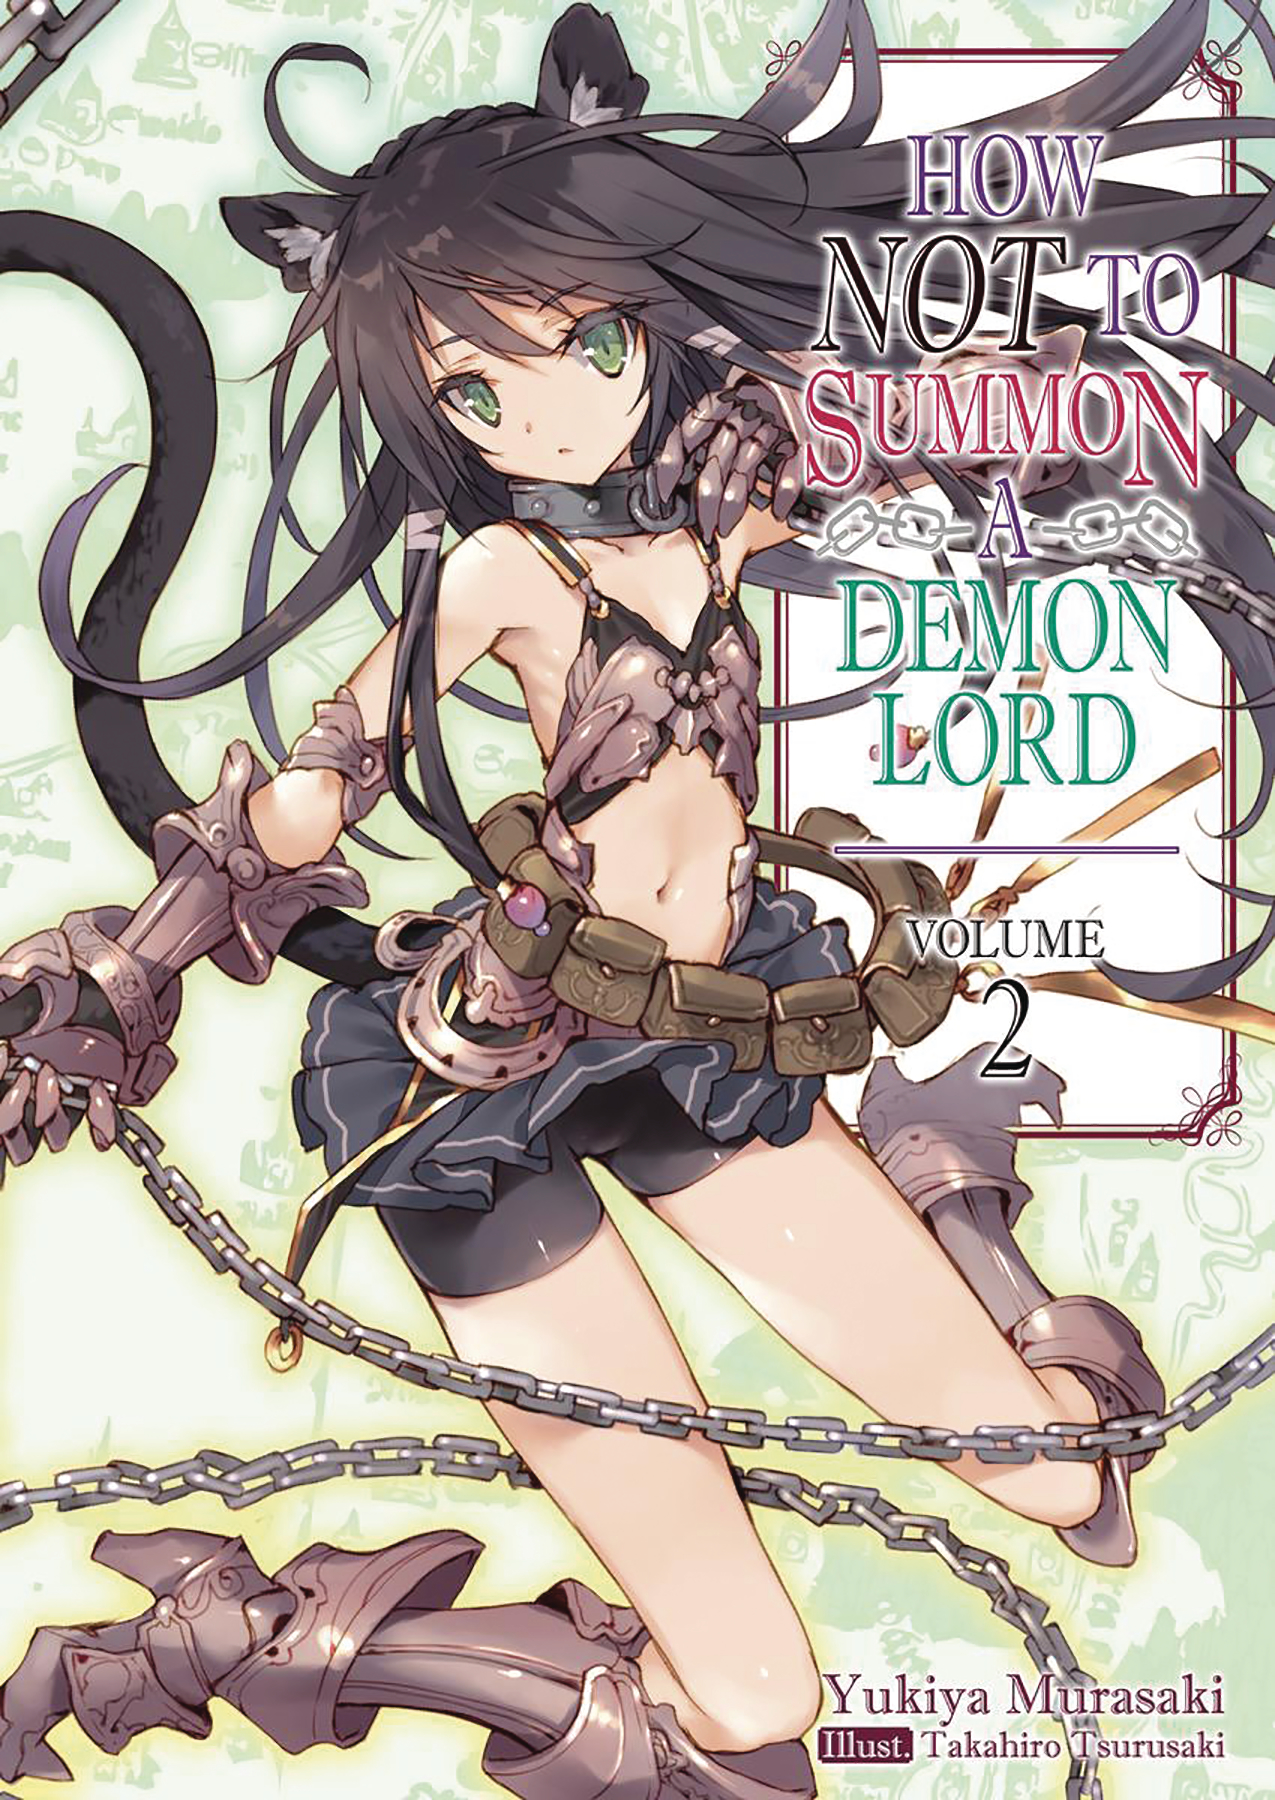 How not to summon demon lord light novel SC vol 02.